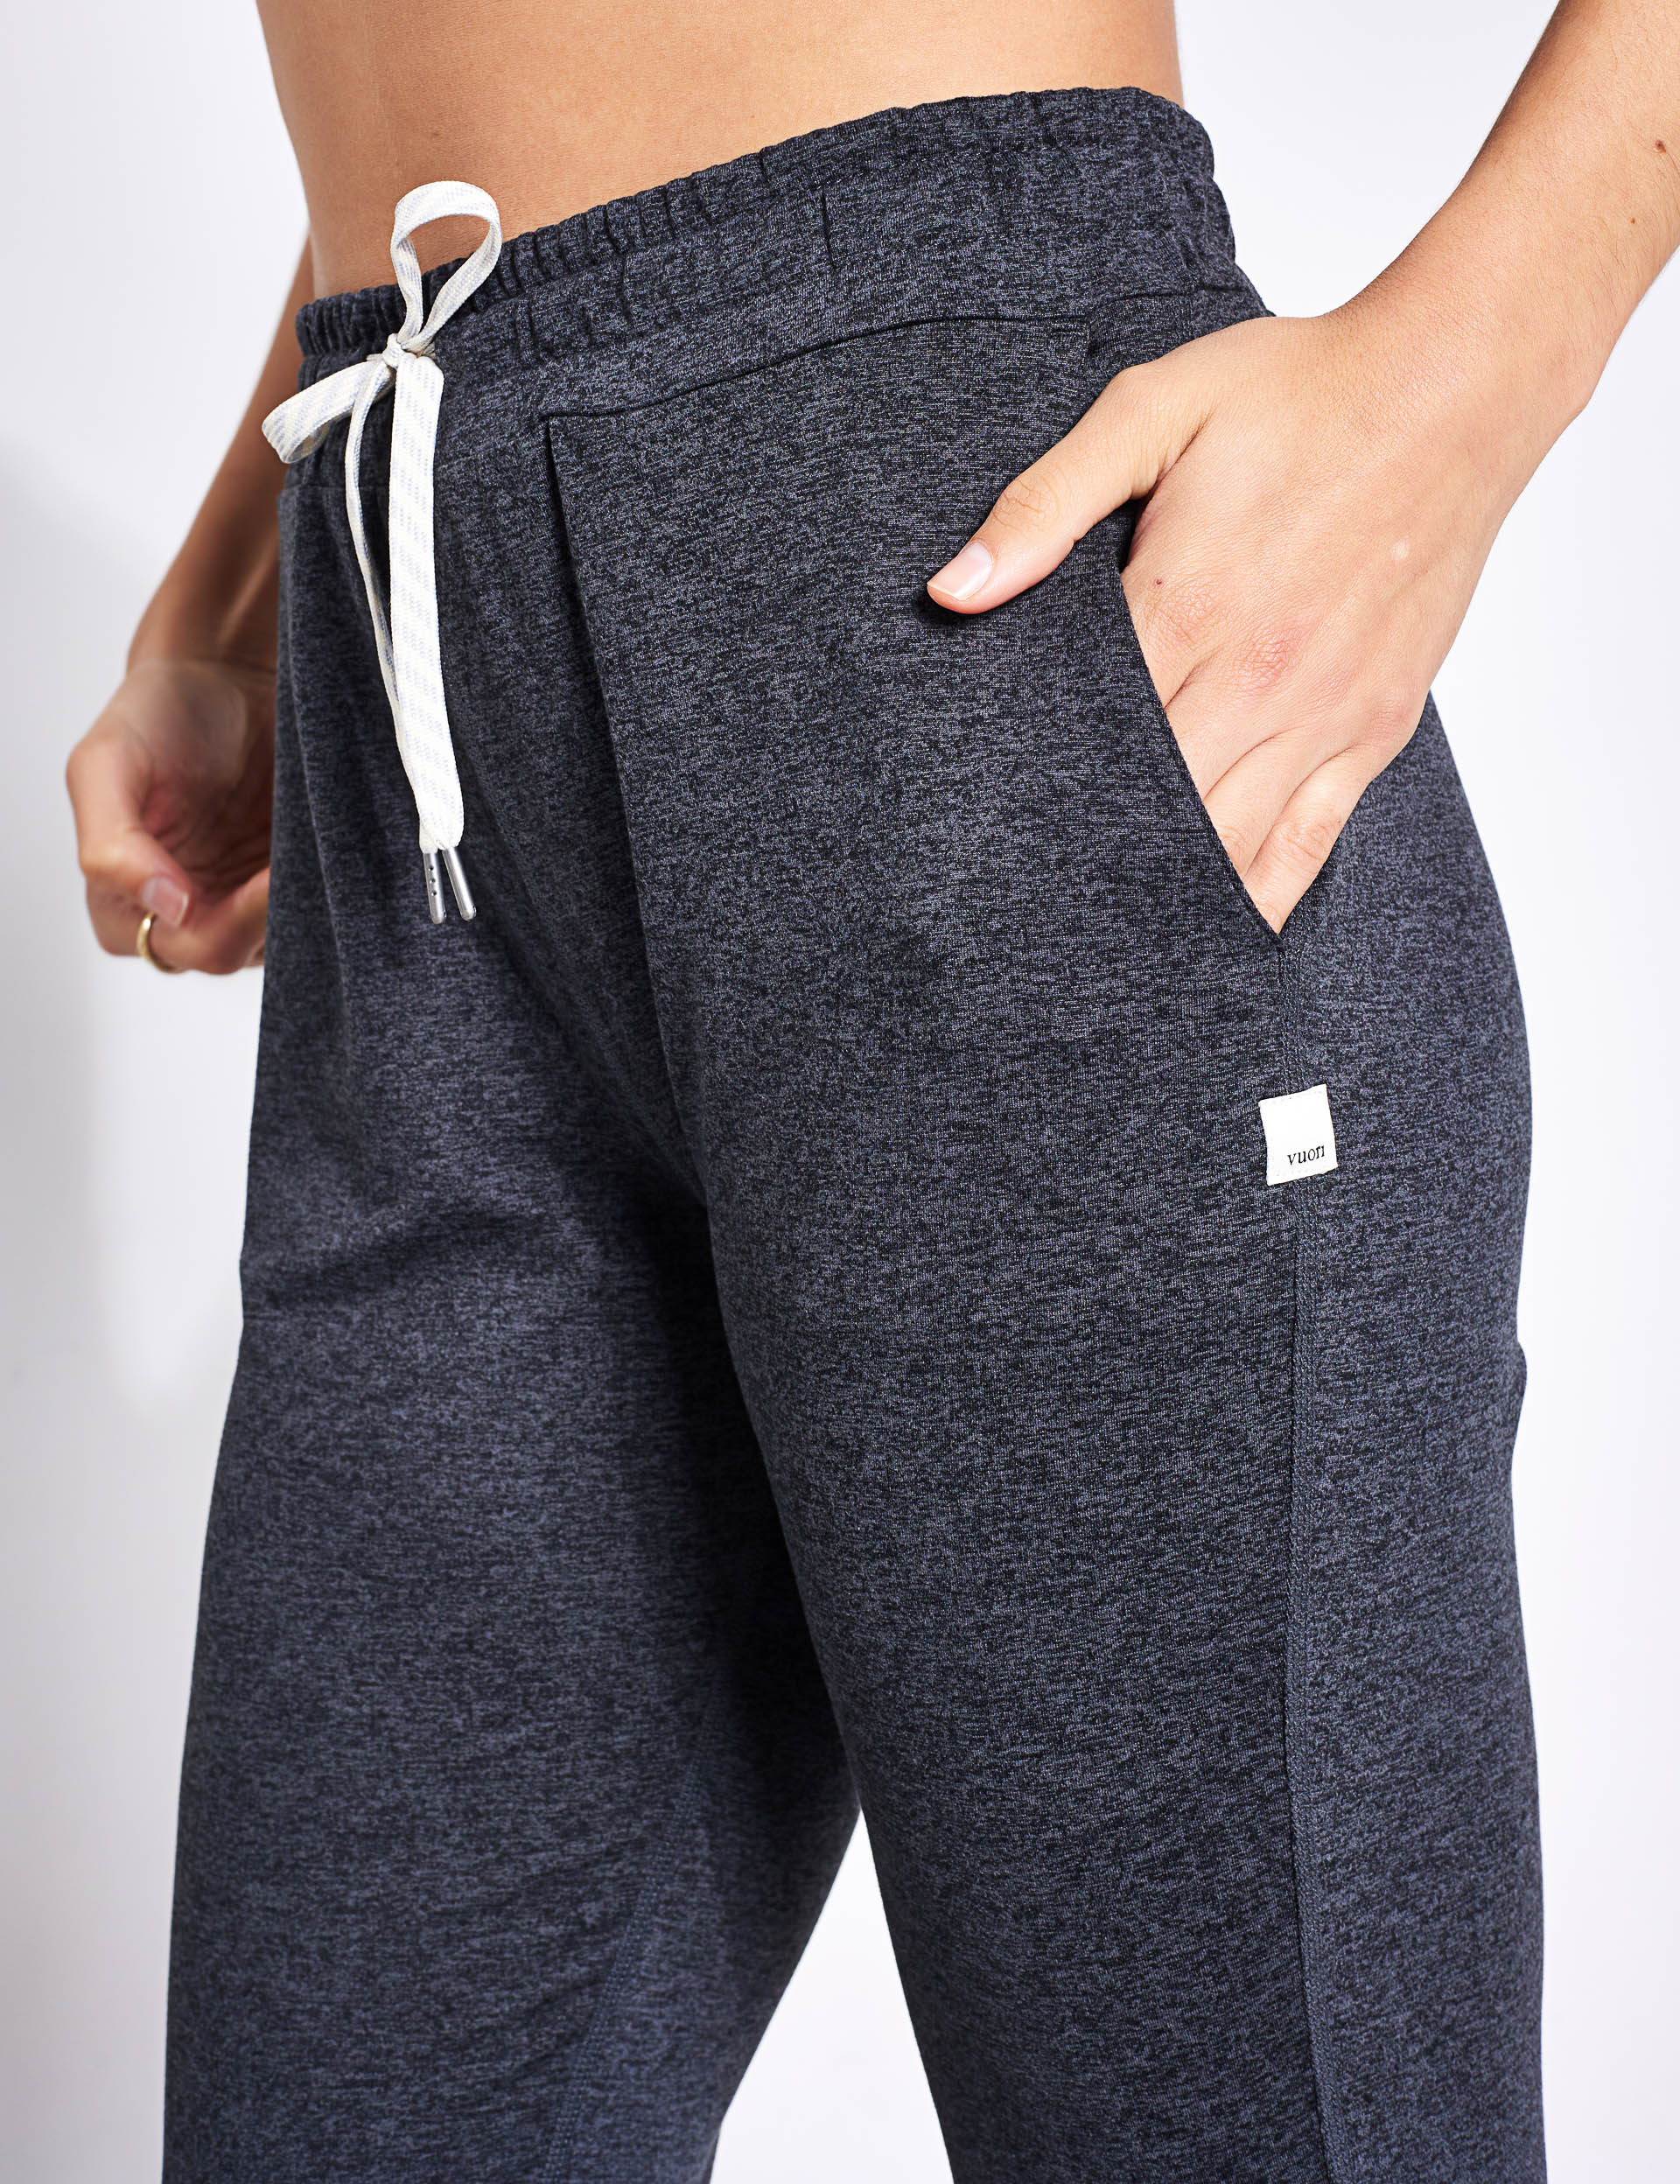 Around The Clock Jogger - Charcoal